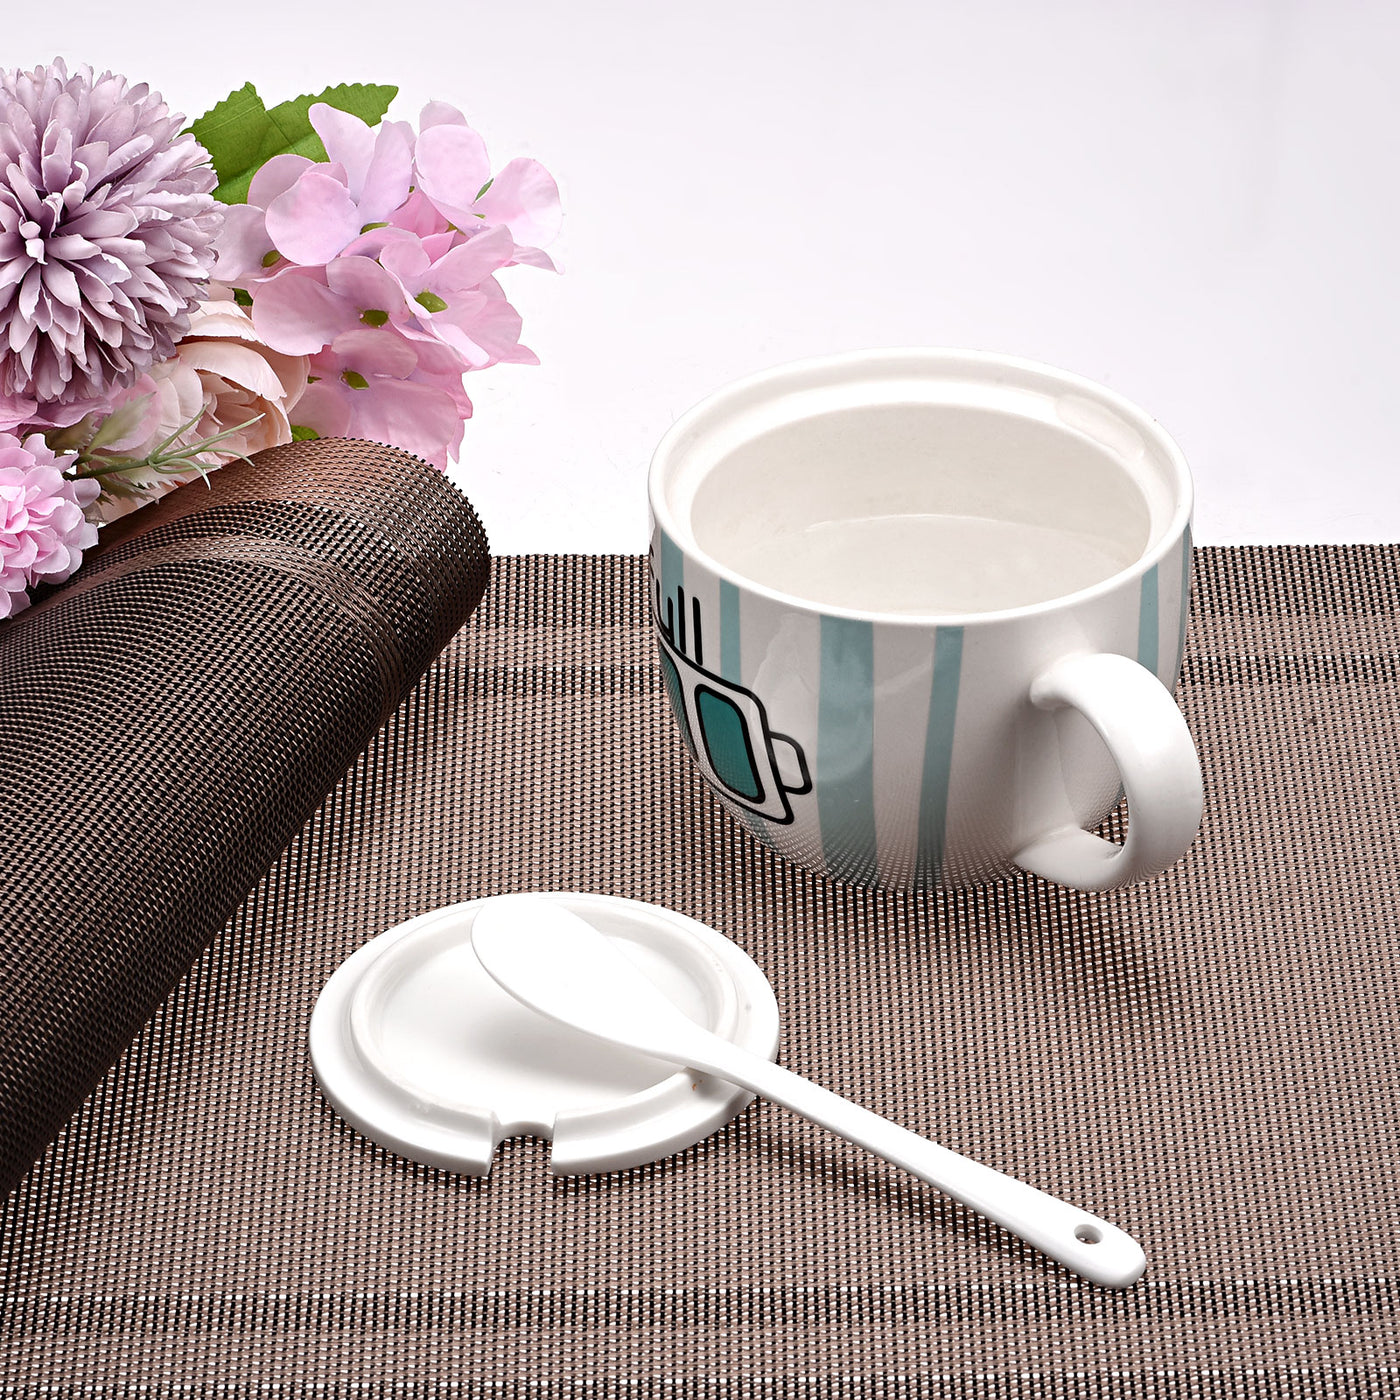 uxcell Uxcell Place Mats, 450x300mm Table Mats Set of 2 PVC Washable Woven Placemat Coffee